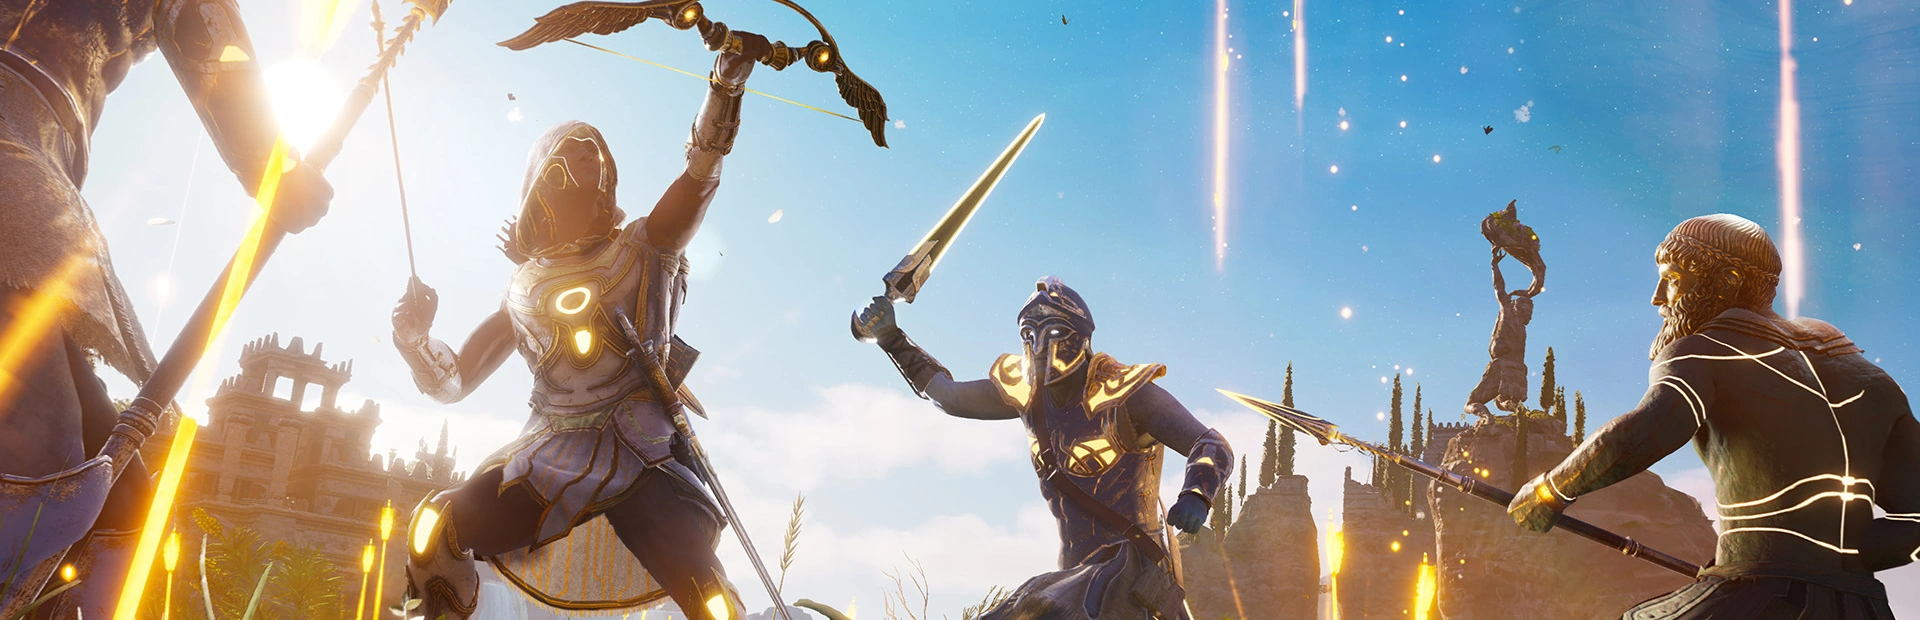 Assassins Creed Odyssey the fate of atlantis.banner2